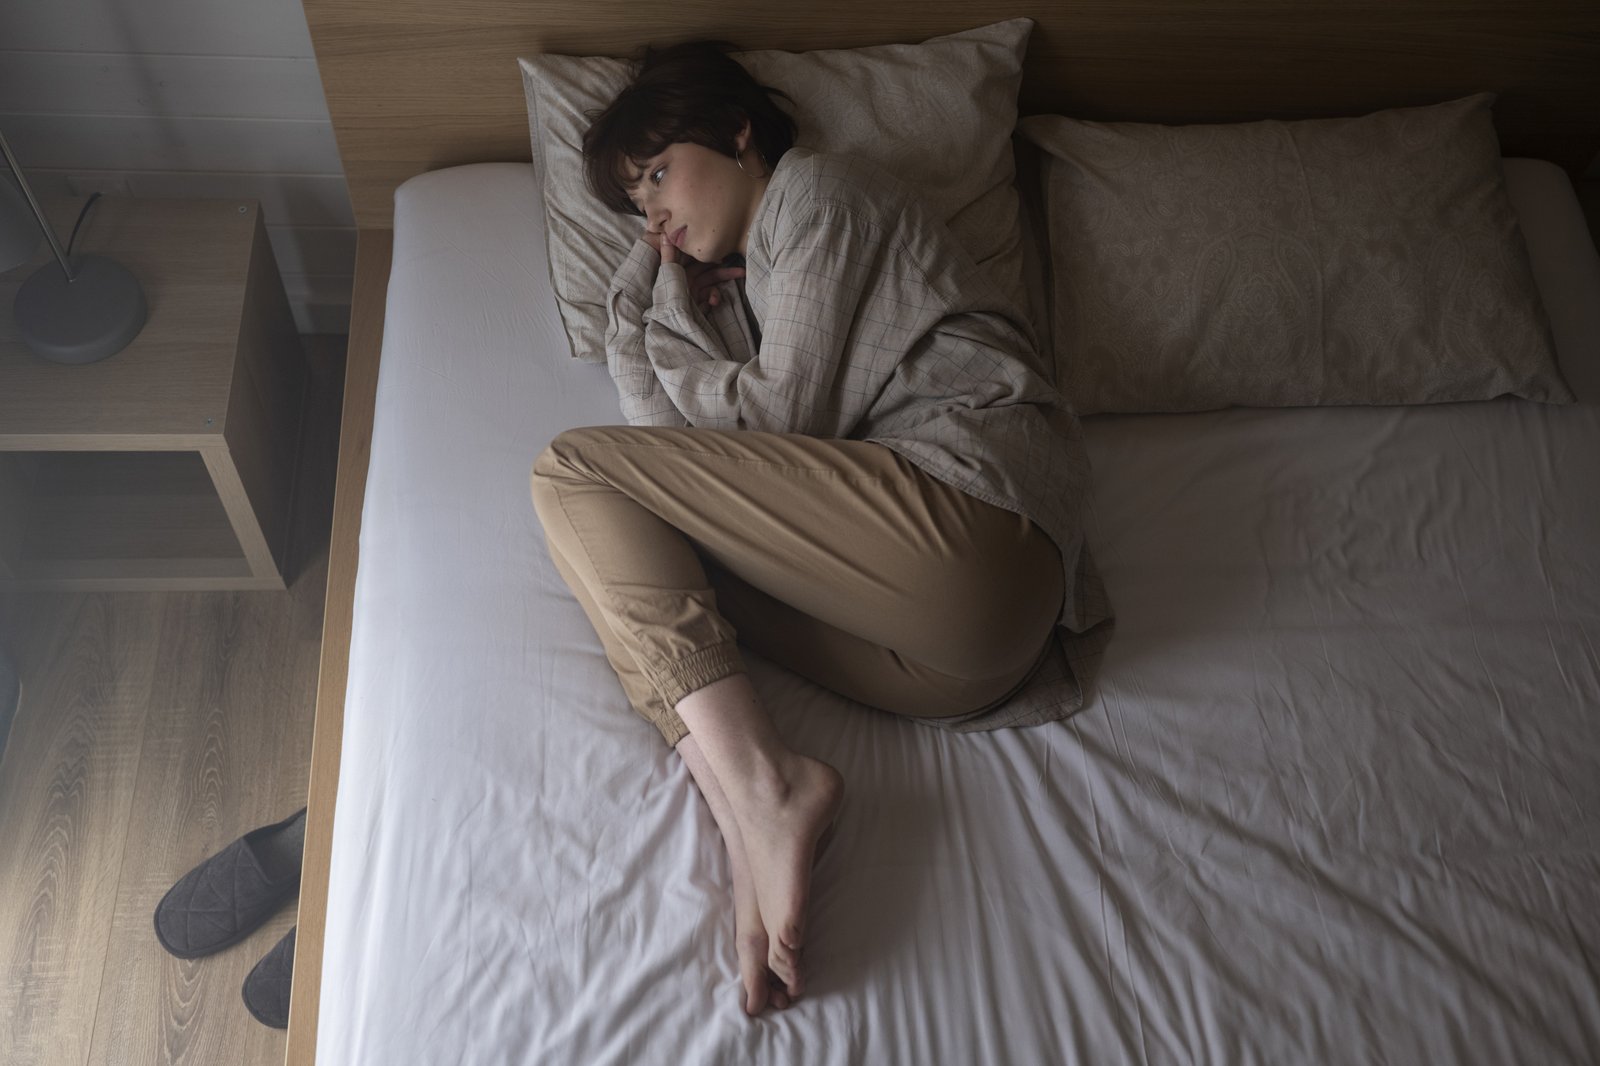 Know All About The Common Urological Symptom That Could Disrupt Sleep